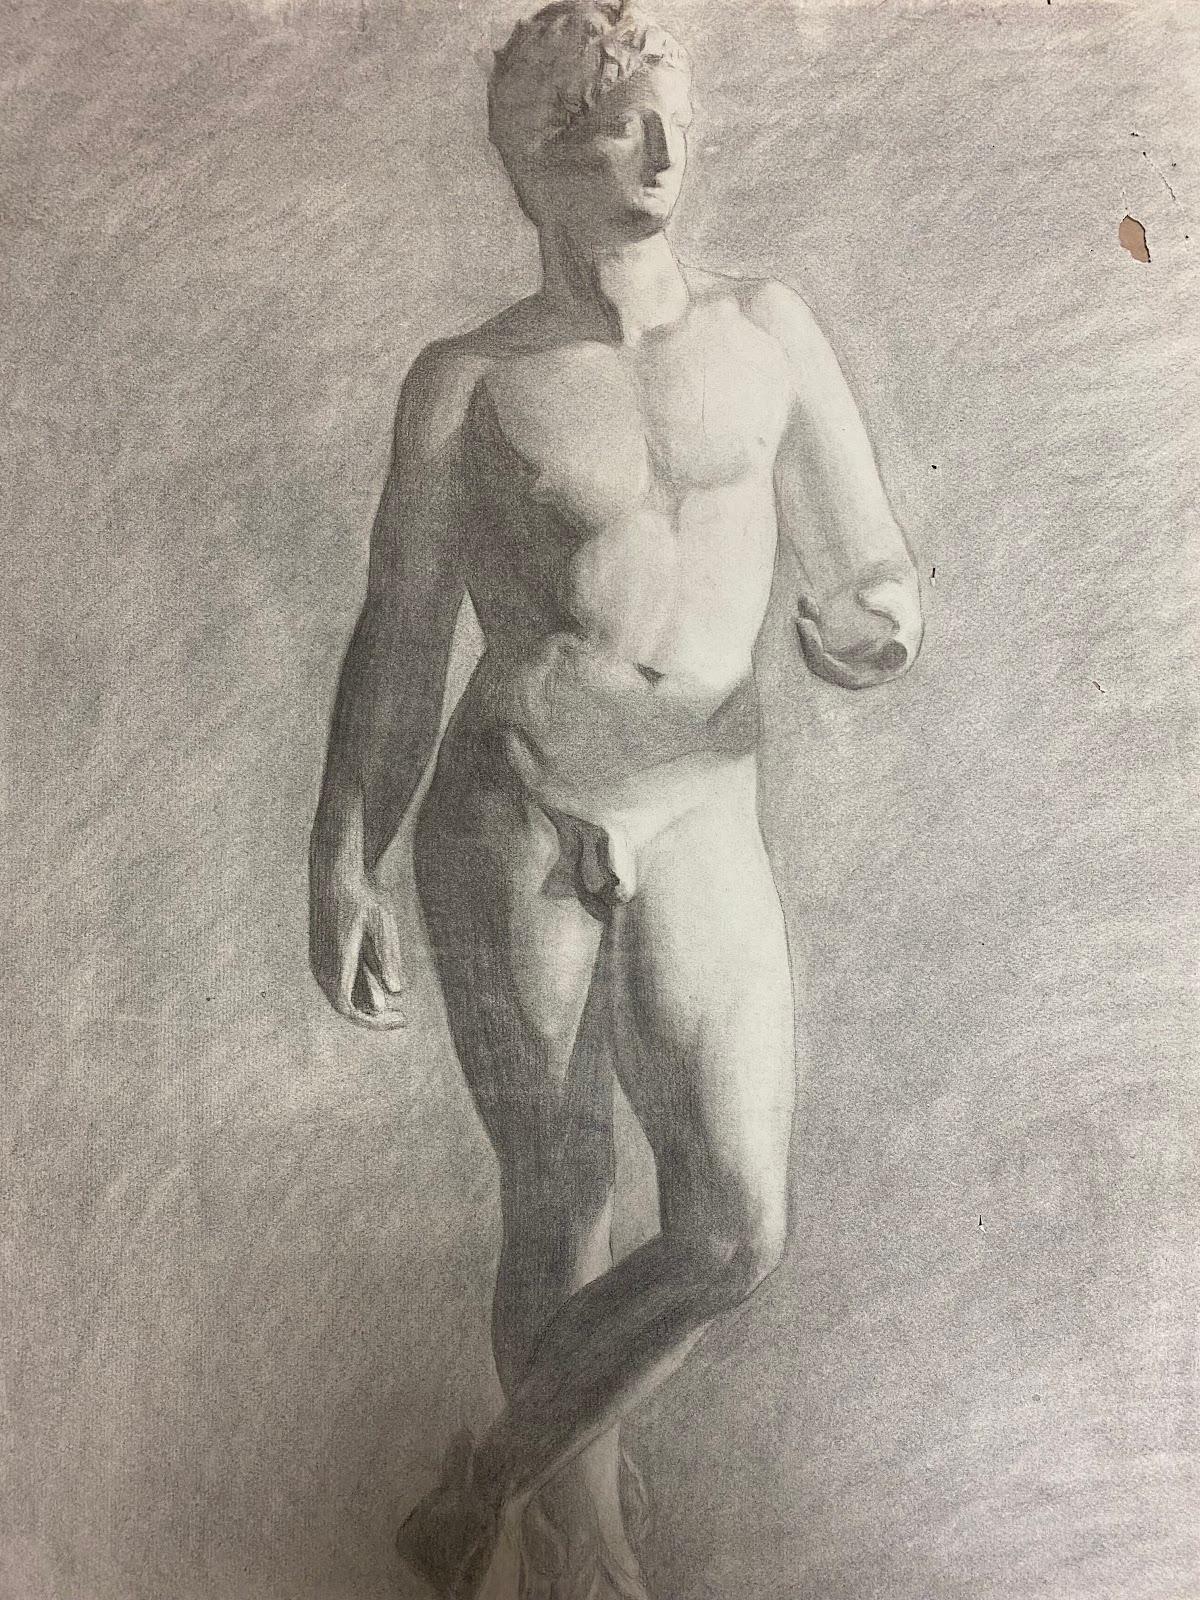 Life study drawing
original atelier drawing
by the French artist, Jeanne Nachat (1898-1984)
Nachat attended the prestigious Académie des Beaux-Arts in Paris and some of the drawings in this collection carry their official stamp. Some of France's